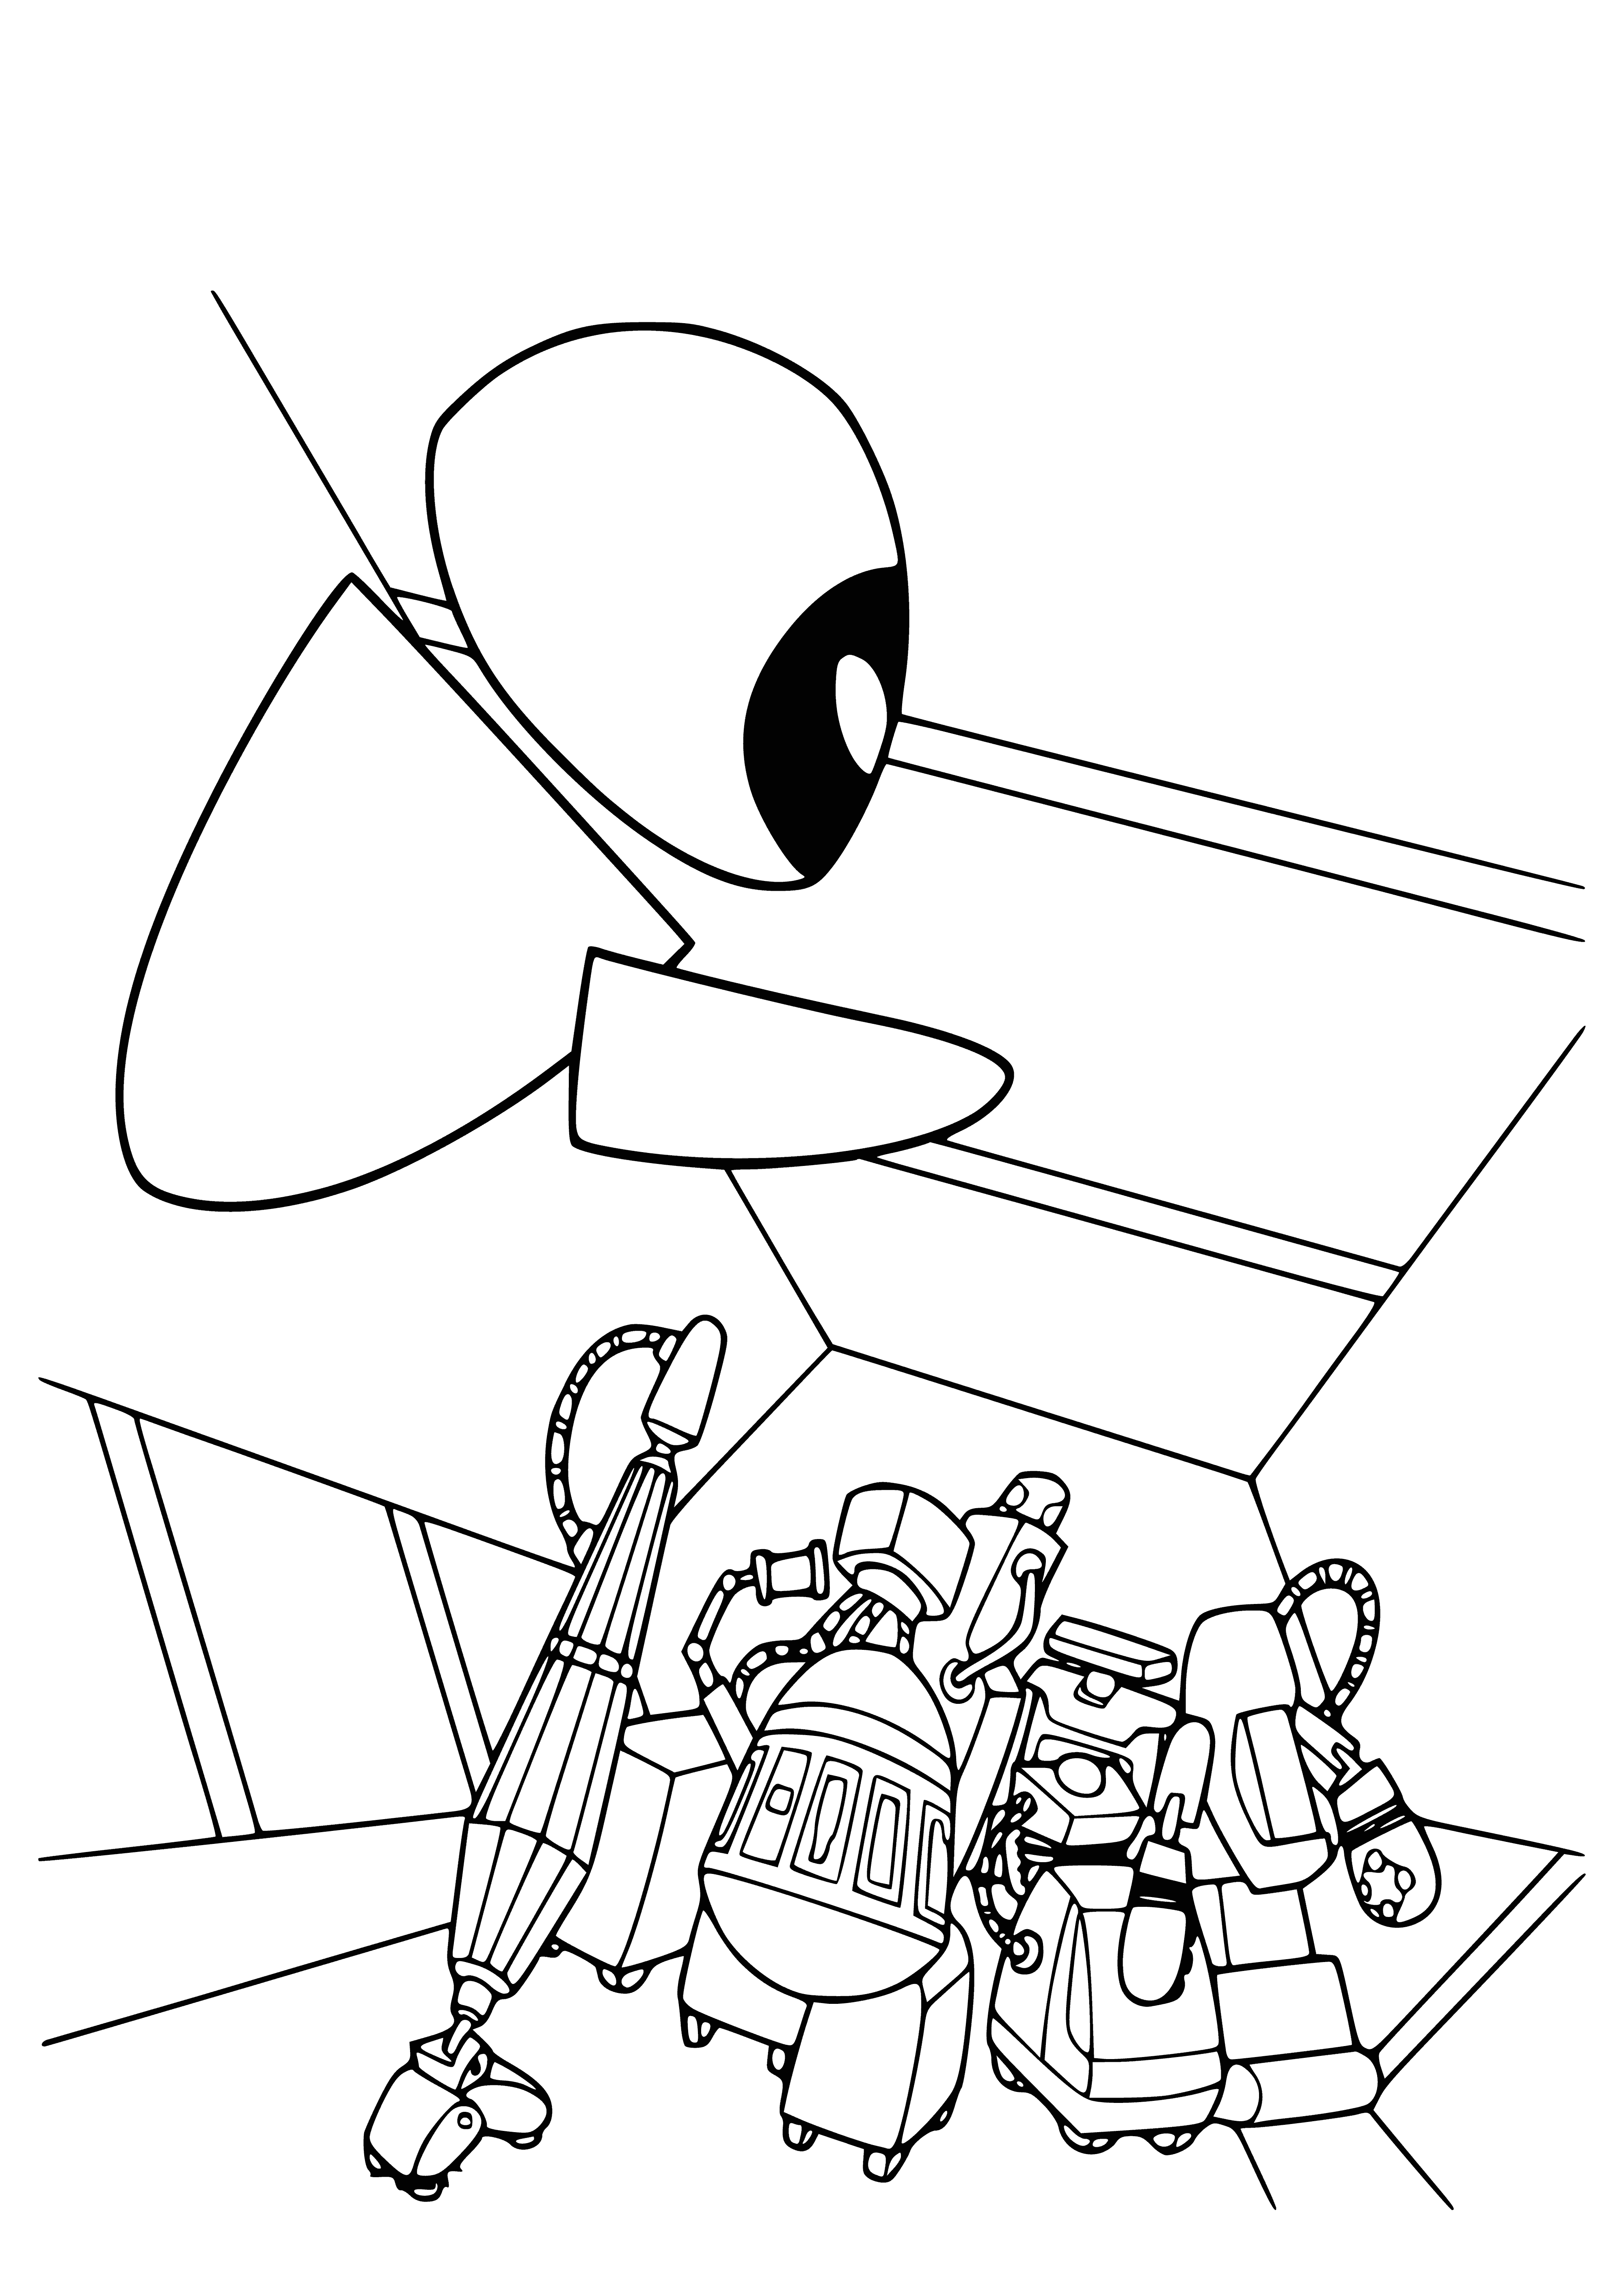 coloring page: Robots conversing; one repairing/checking on the other with a large dent on its chest.